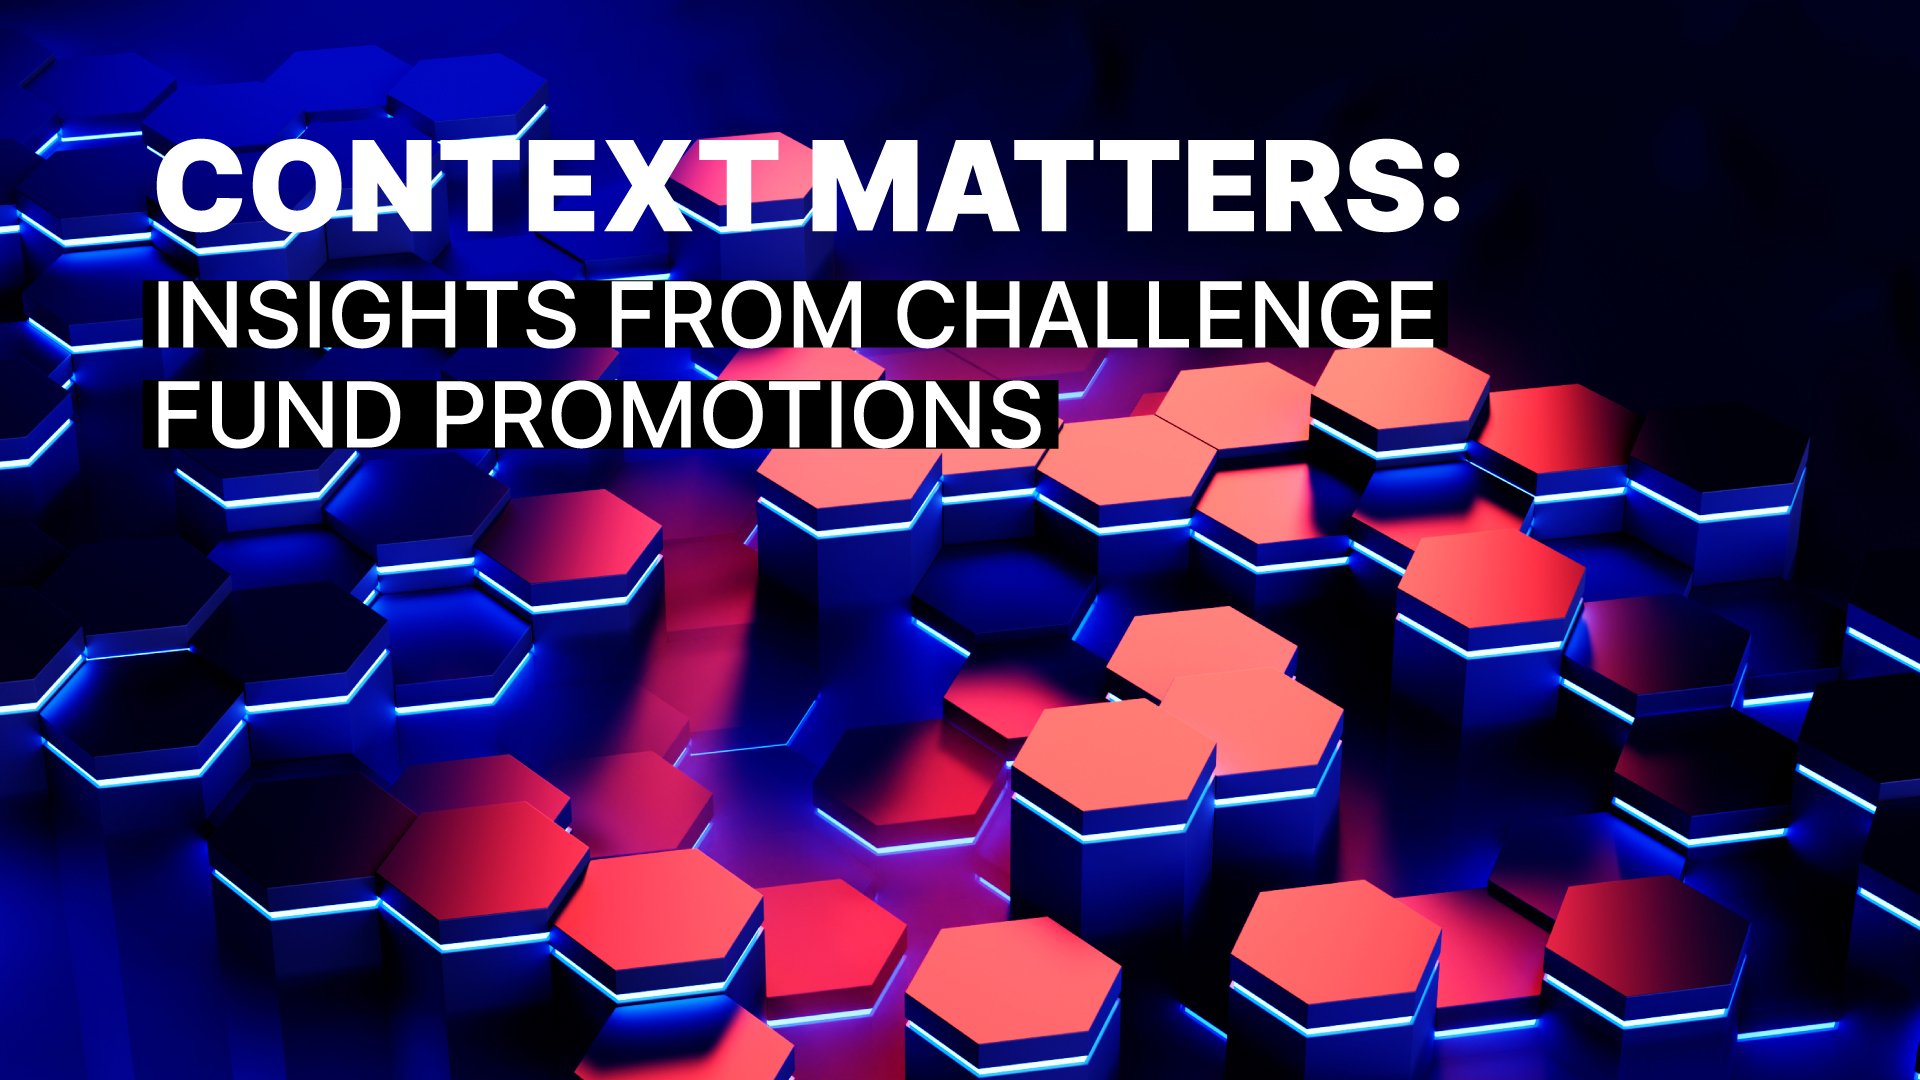 Context matters: Insights from challenge fund promotions